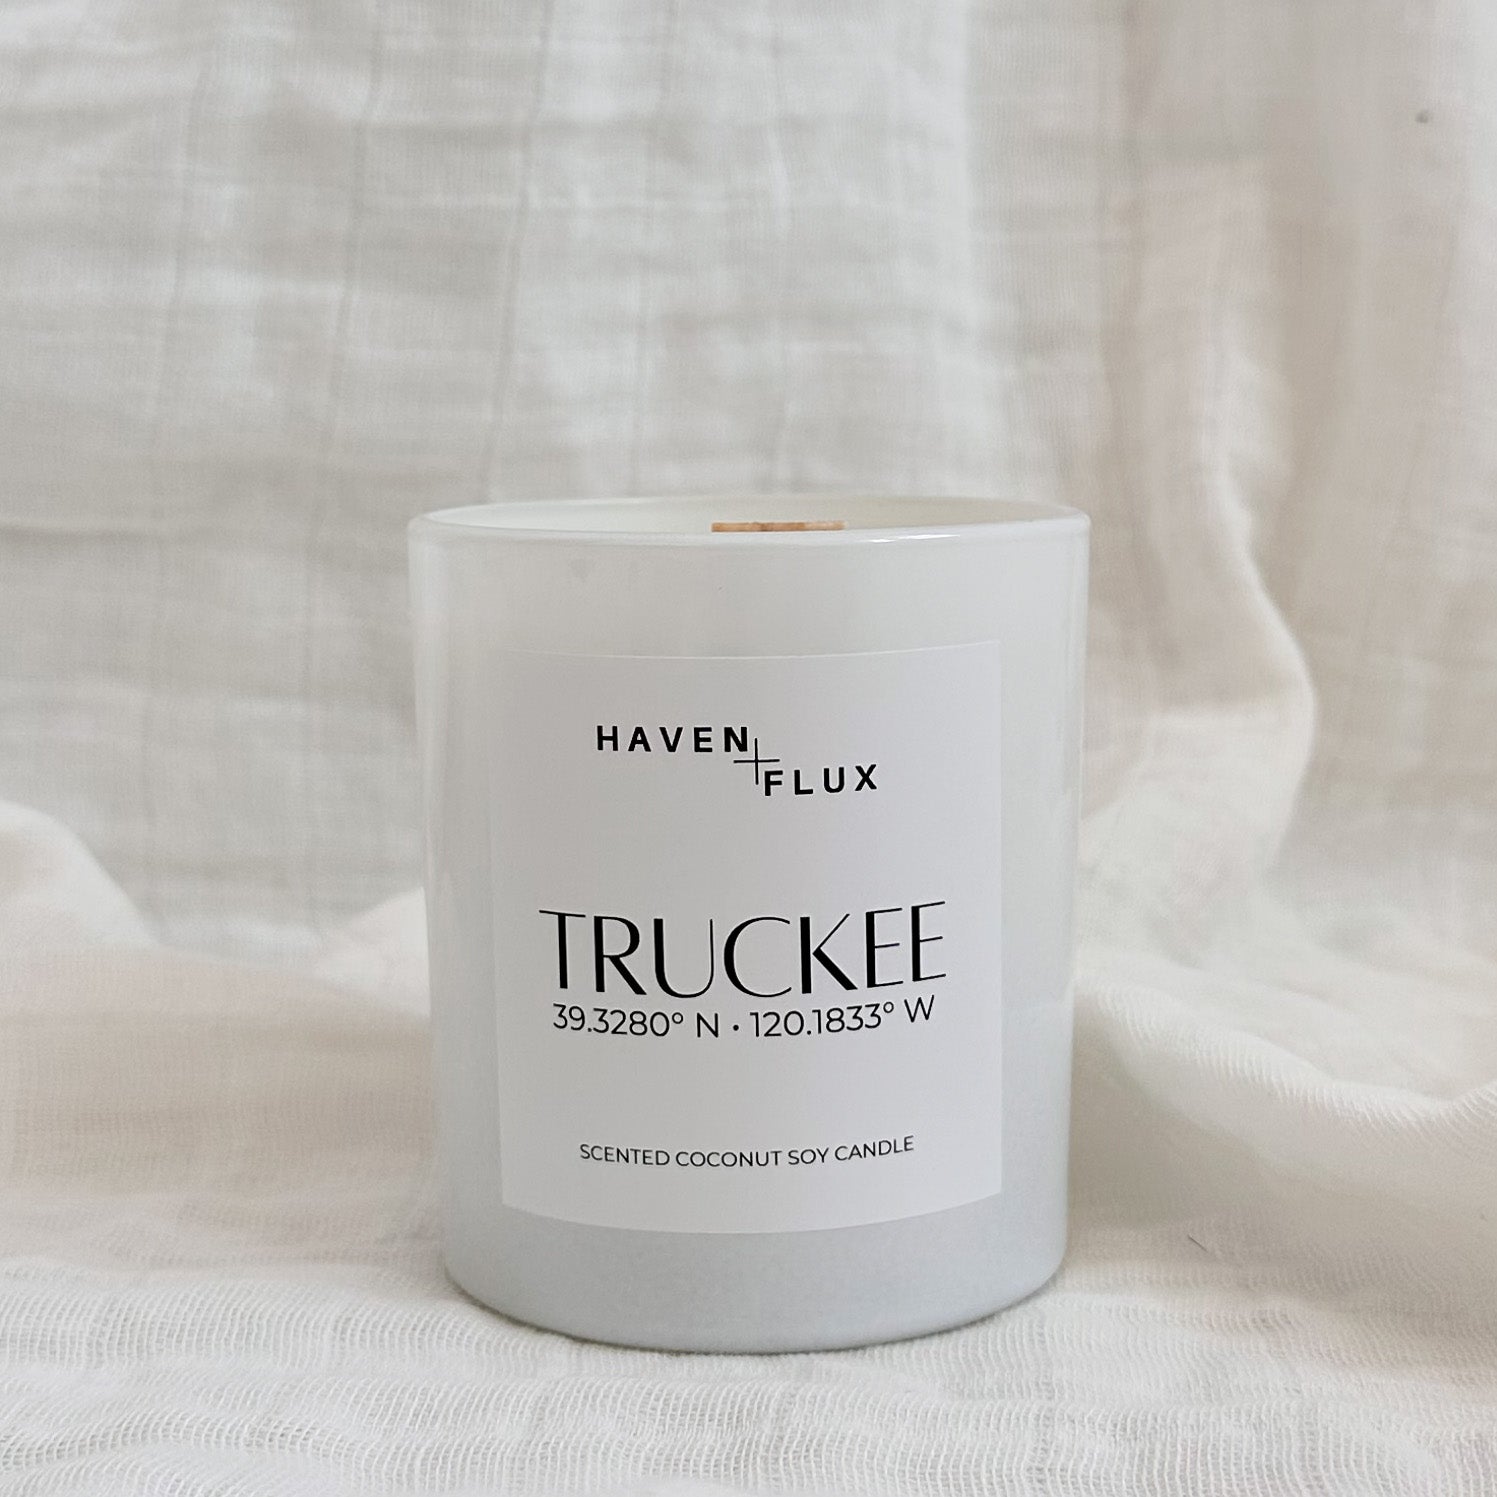 Non-Toxic Coconut Soy Wax Wooden Wick Truckee California Coordinate Candle for Mental Health